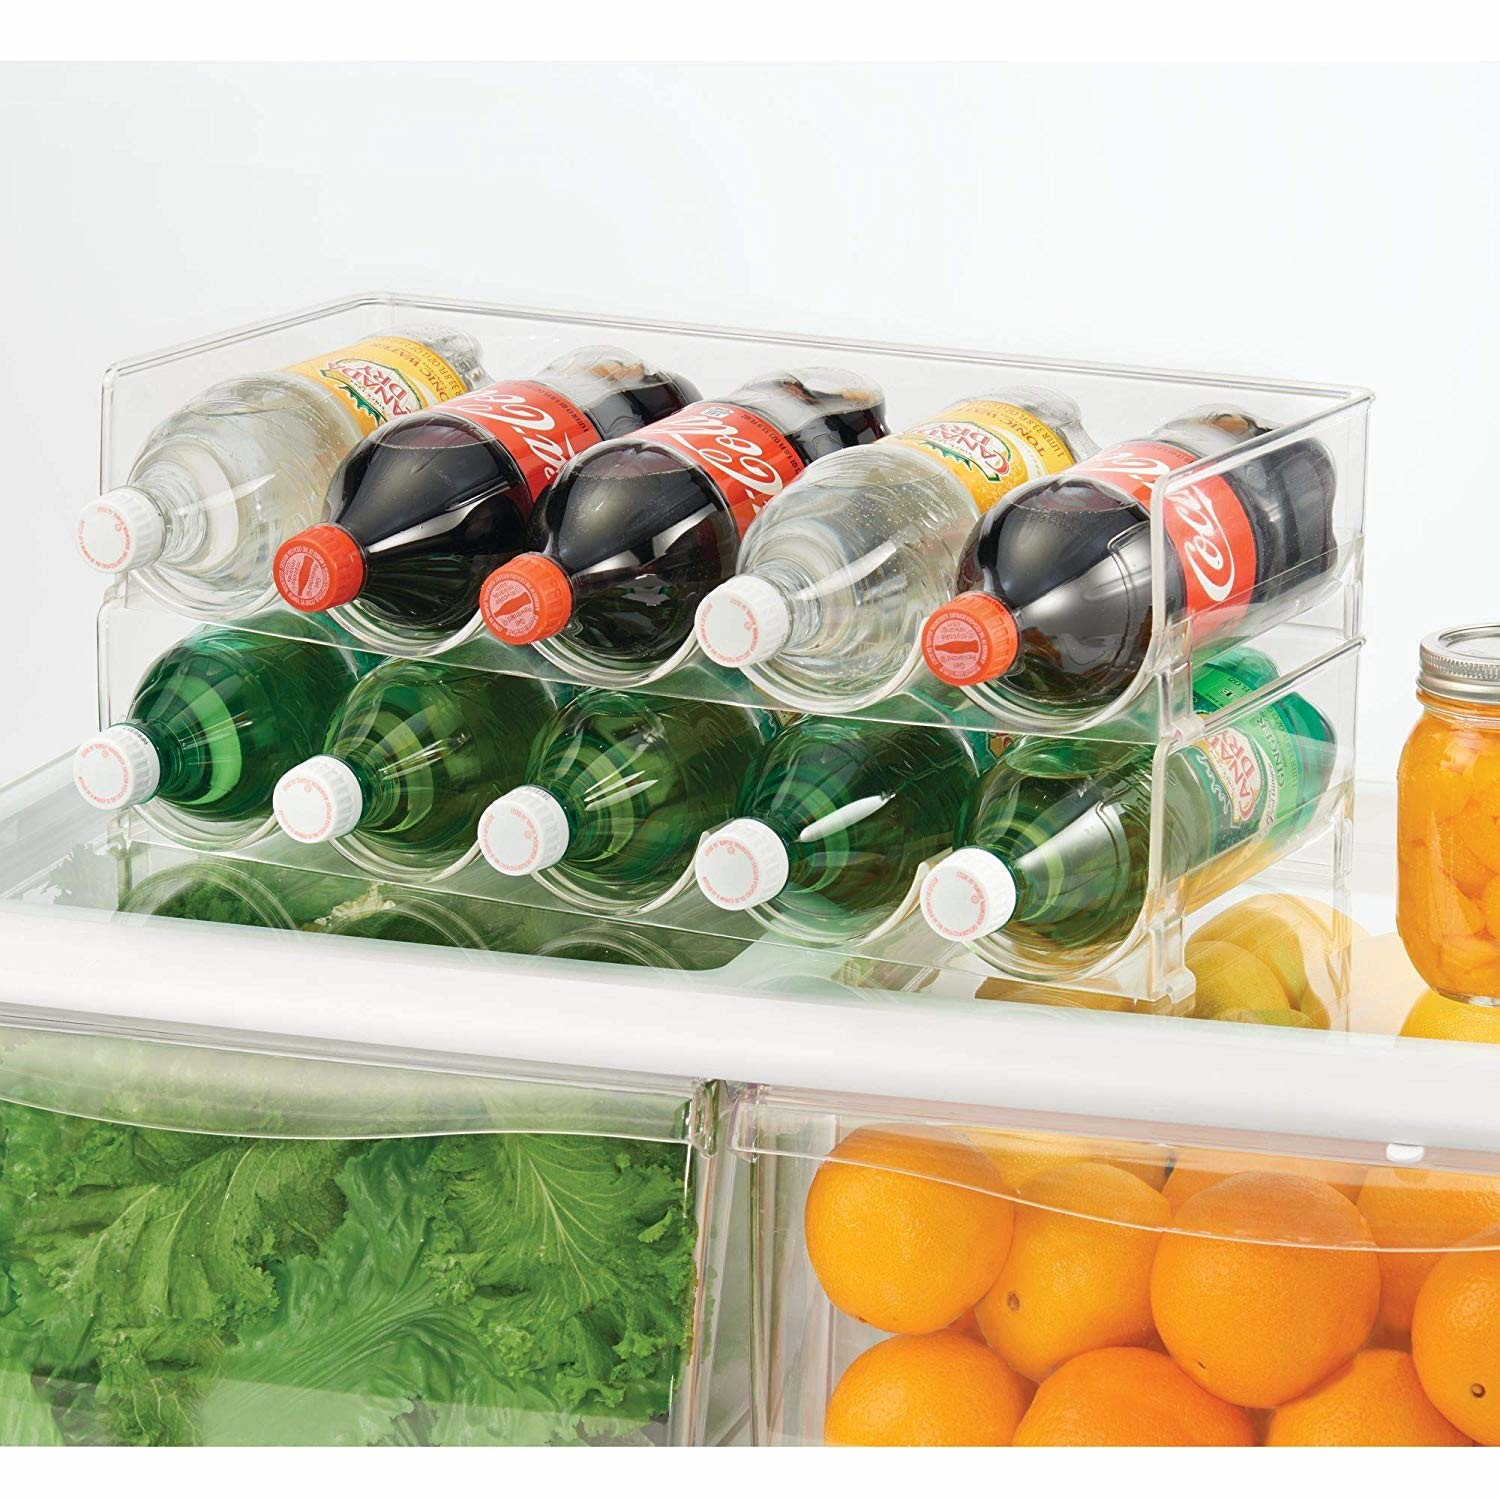  BPA Free Plastic Stackable Wine Rack Manufactures